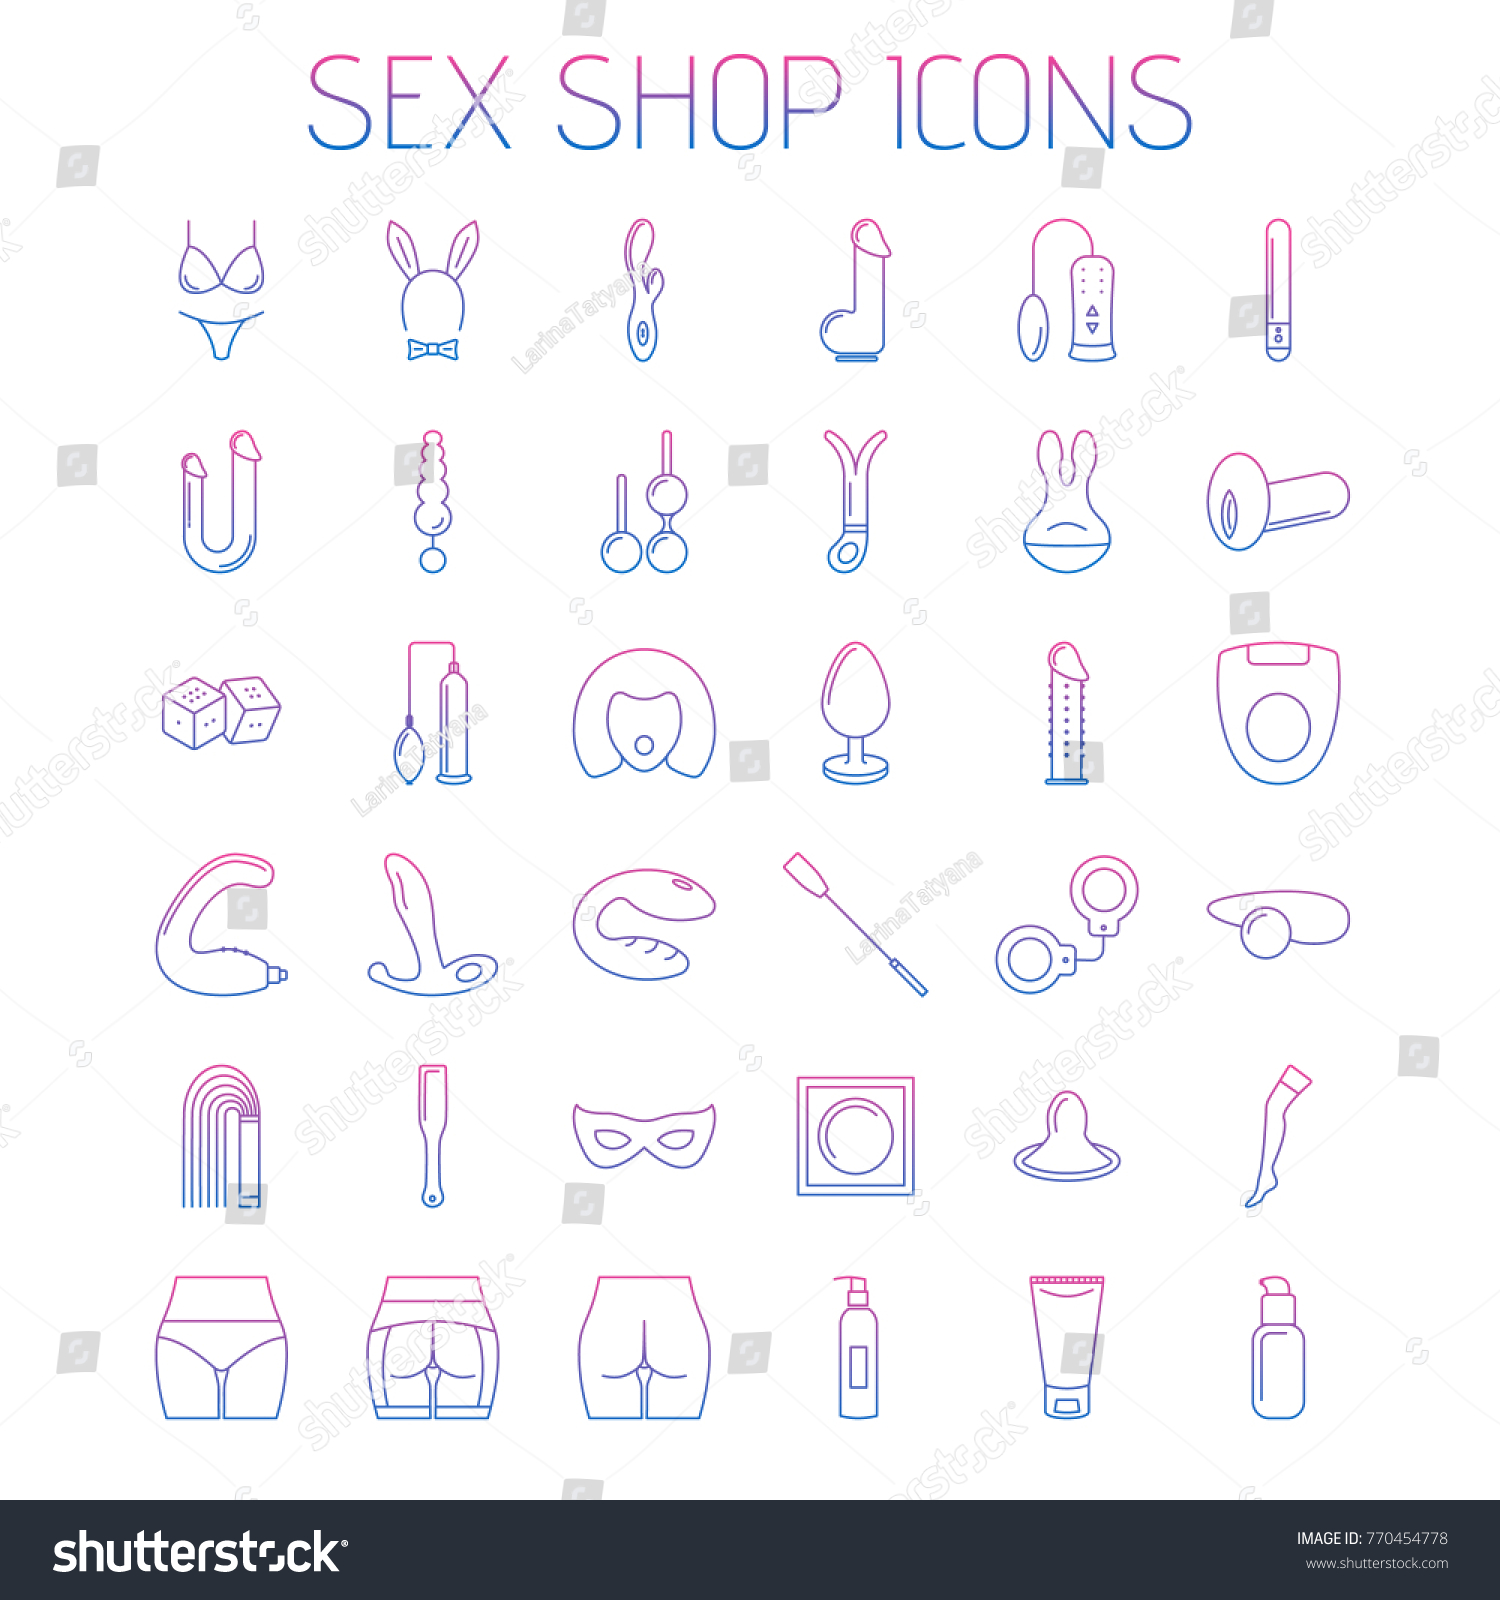 Sex Shop Line Icons Isolated On Stock Vector 770454778 Shutterstock 3502